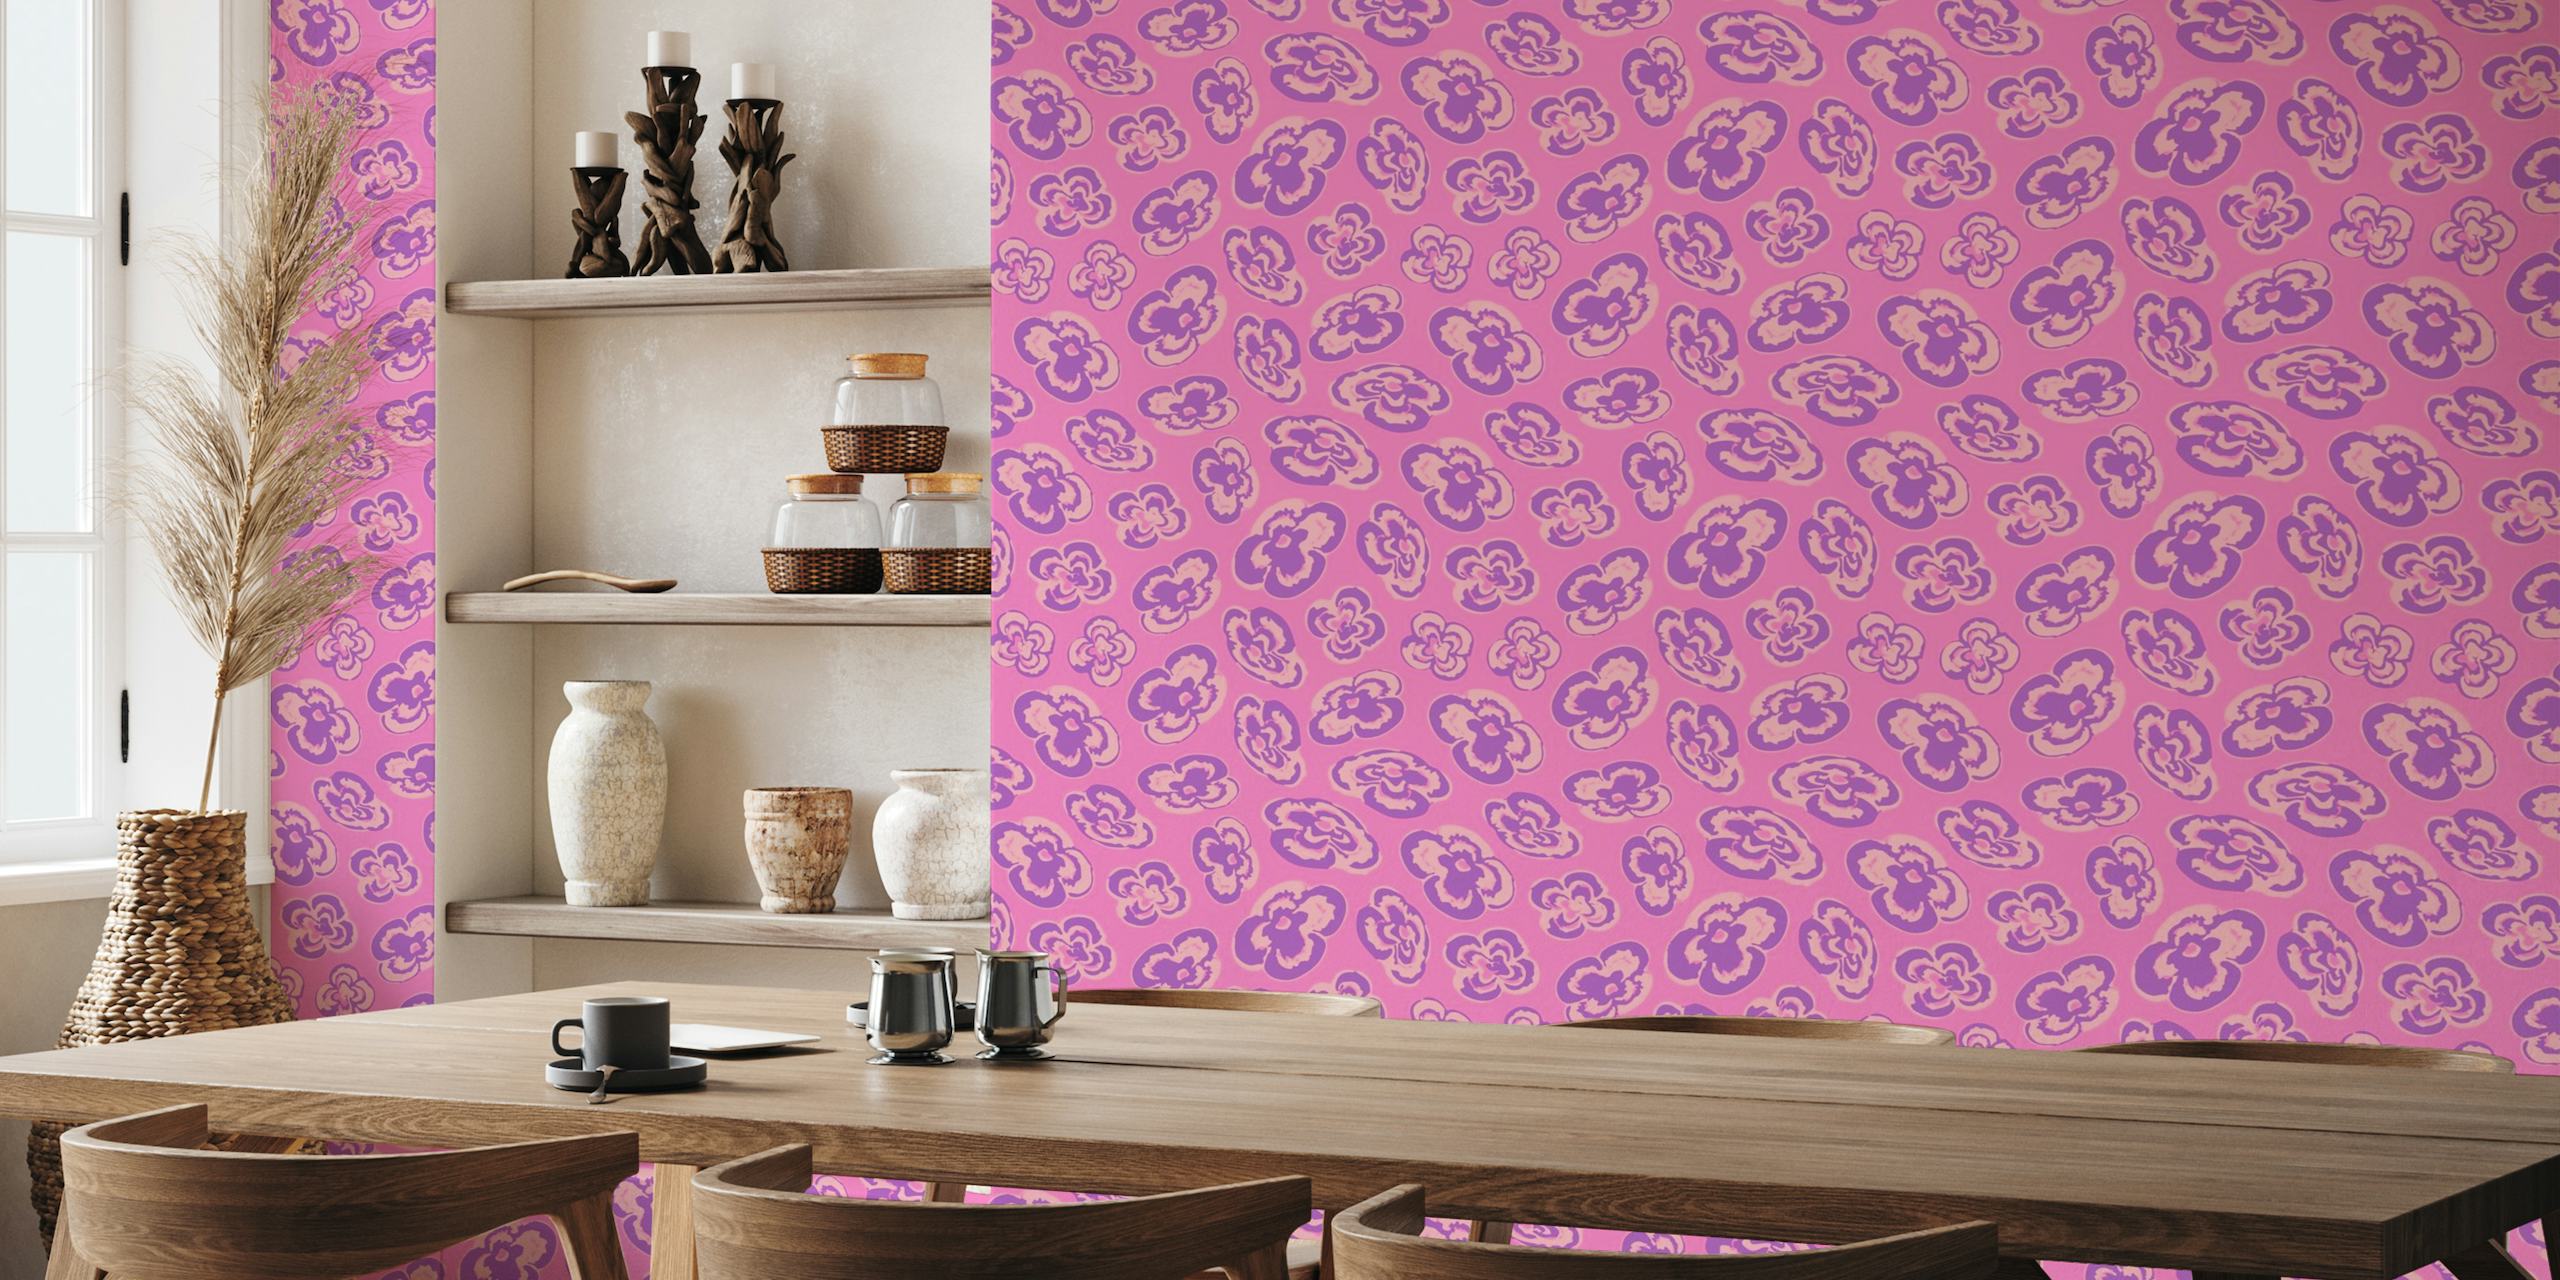 FLOATING LILIES Abstract Floral - Purple Pink papel pintado